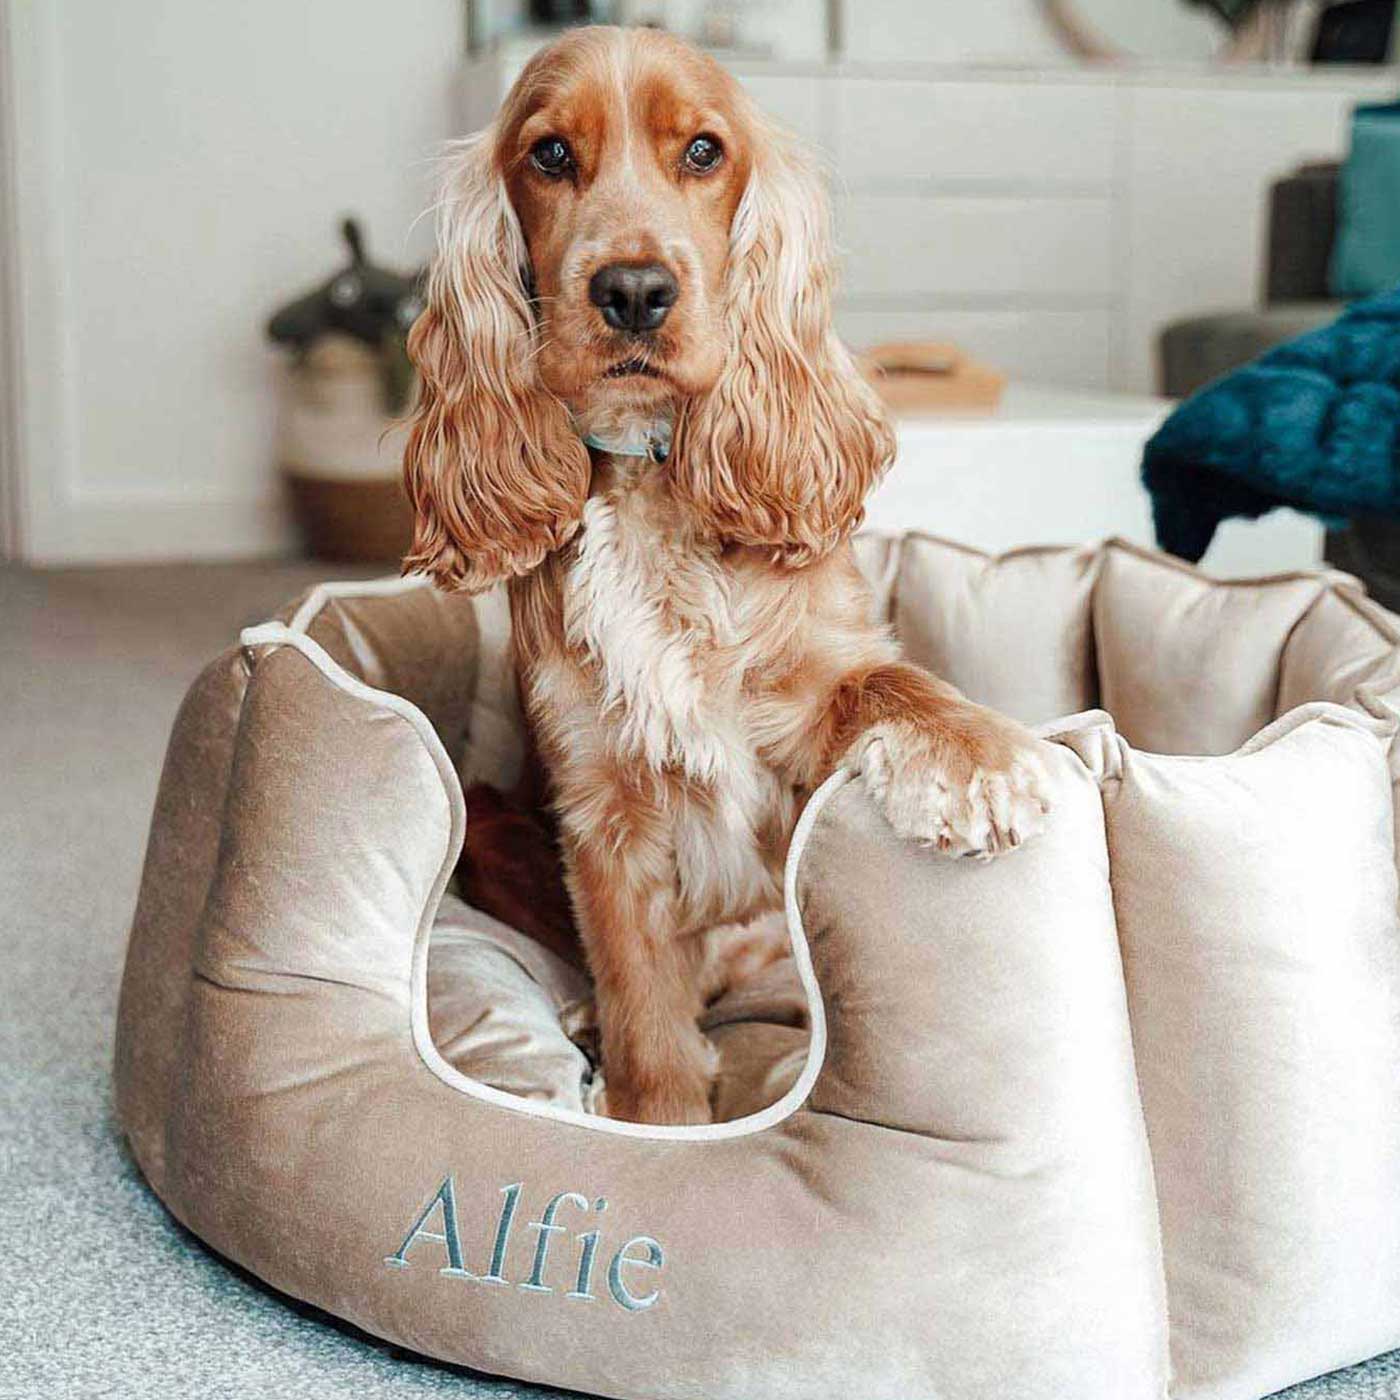 Discover Our Luxurious High Wall Velvet Bed For Dogs, Featuring inner pillow with plush teddy fleece on one side To Craft The Perfect Dogs Bed In Stunning Mushroom Velvet! Available To Personalise Now at Lords & Labradors 